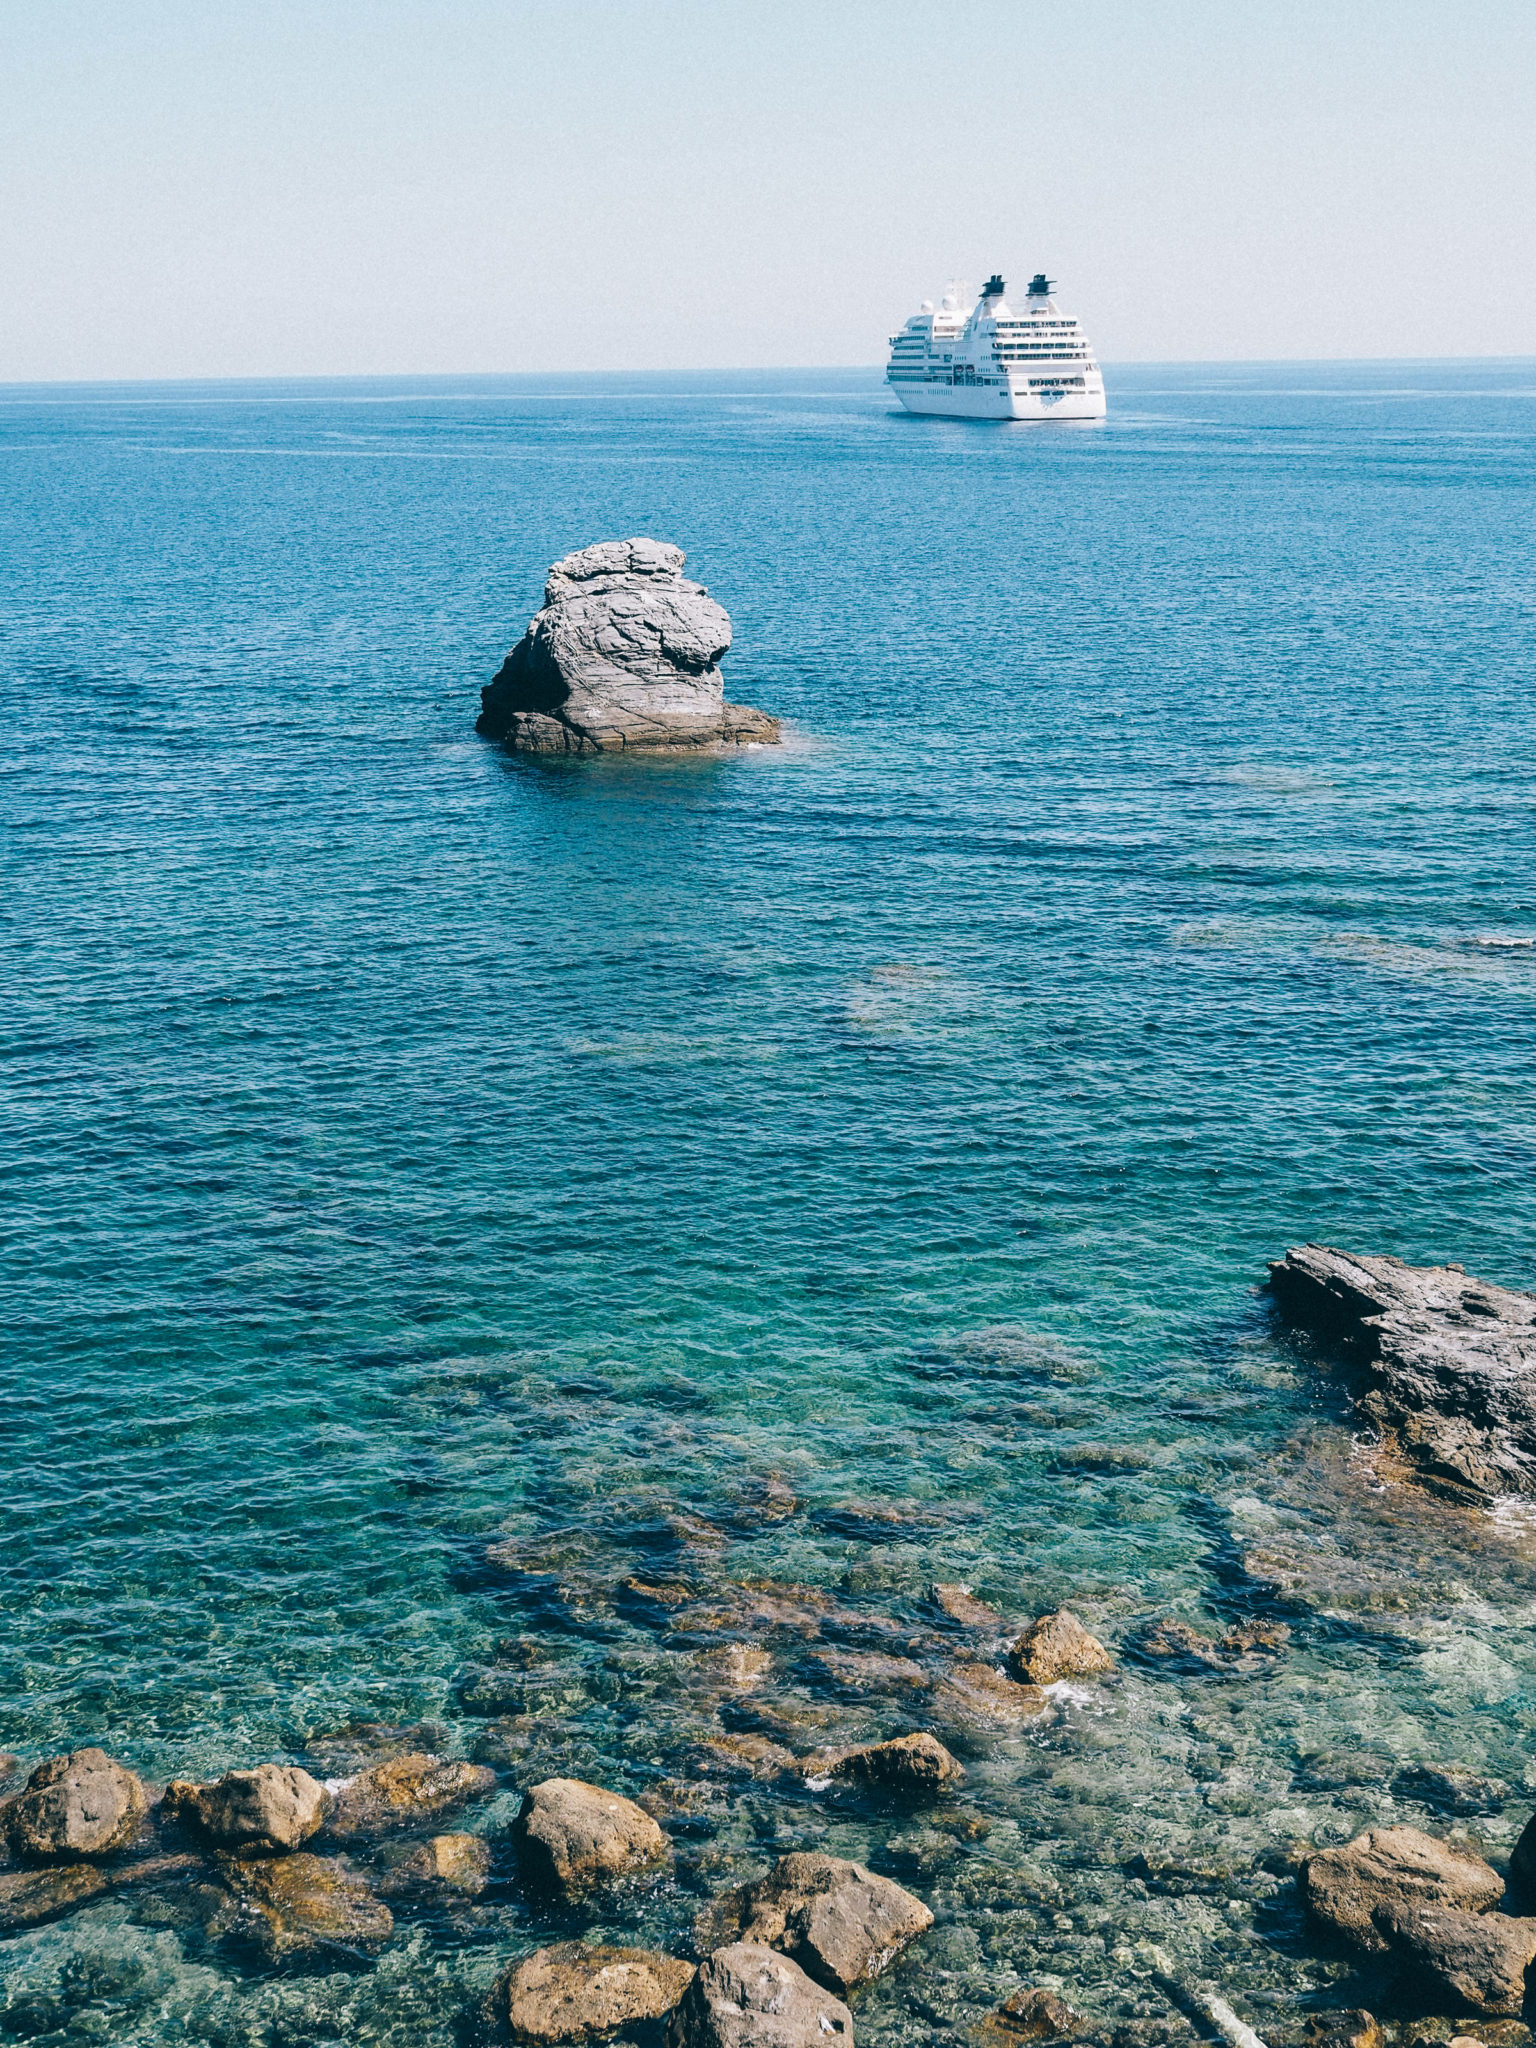 My Seabourn Cruise Review